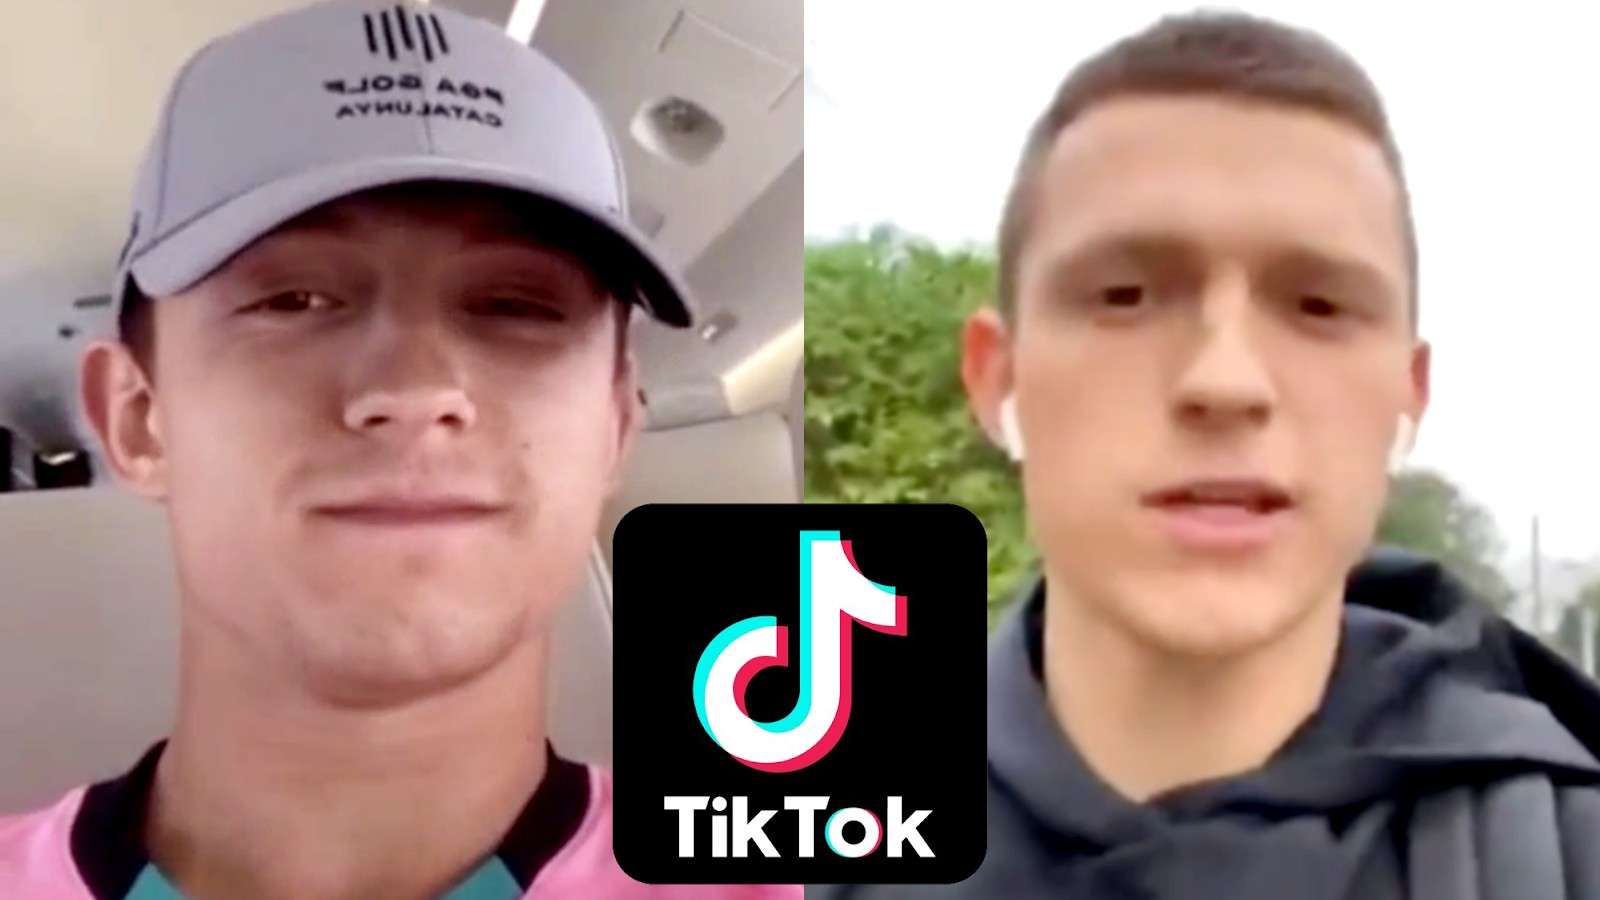 Images of Tom Holland with the TikTok logo